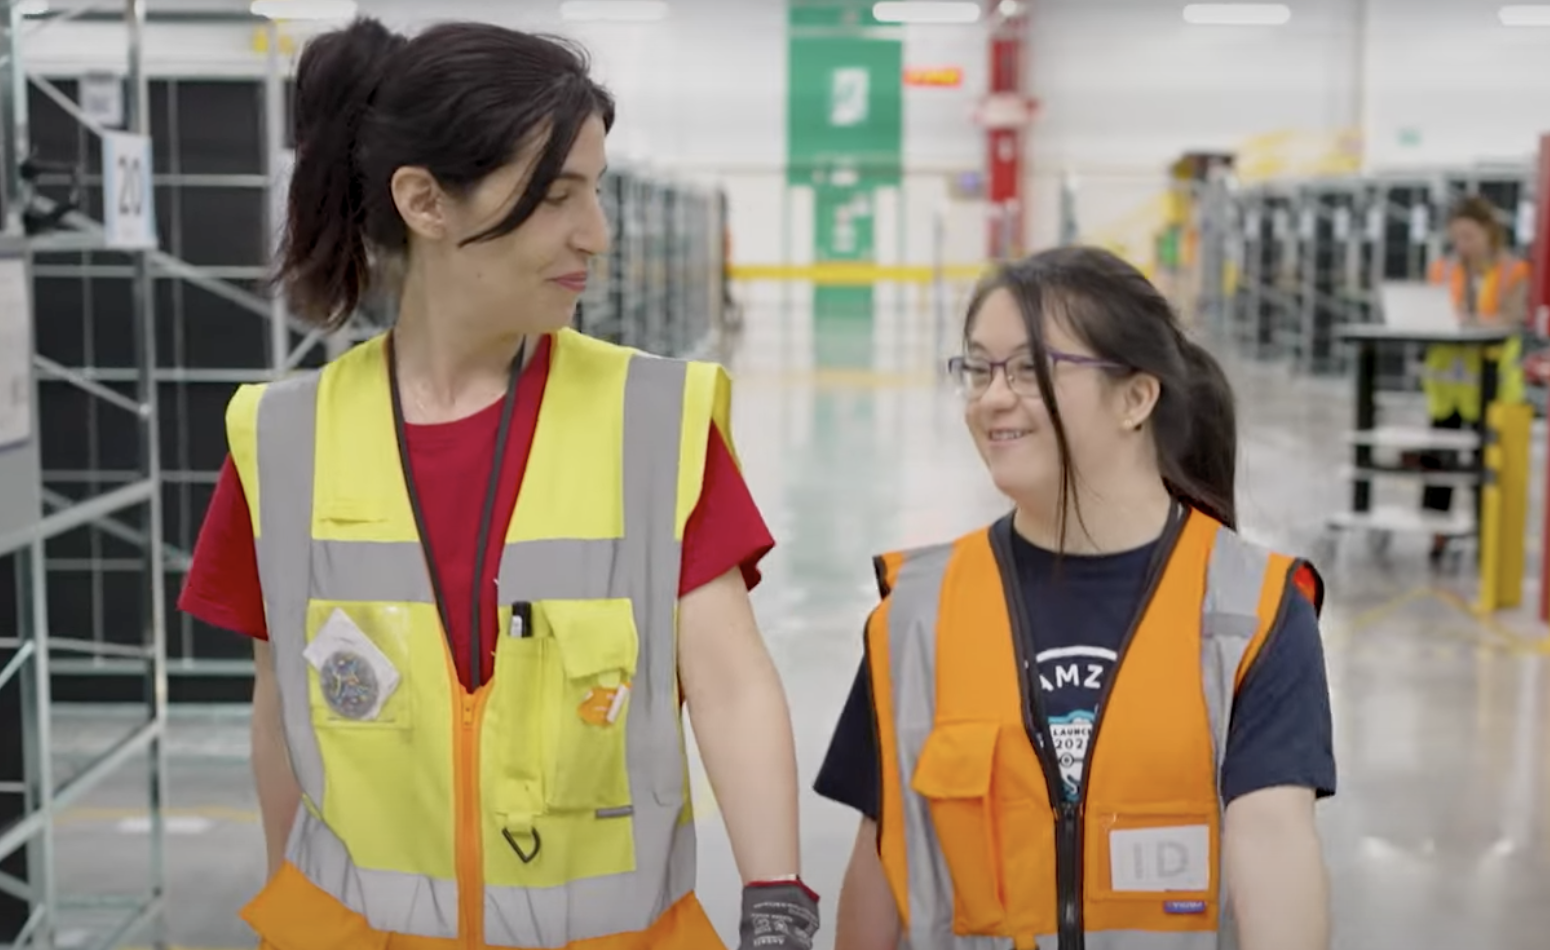 How 2 Amazon Employees helped people with Down syndrome get hired